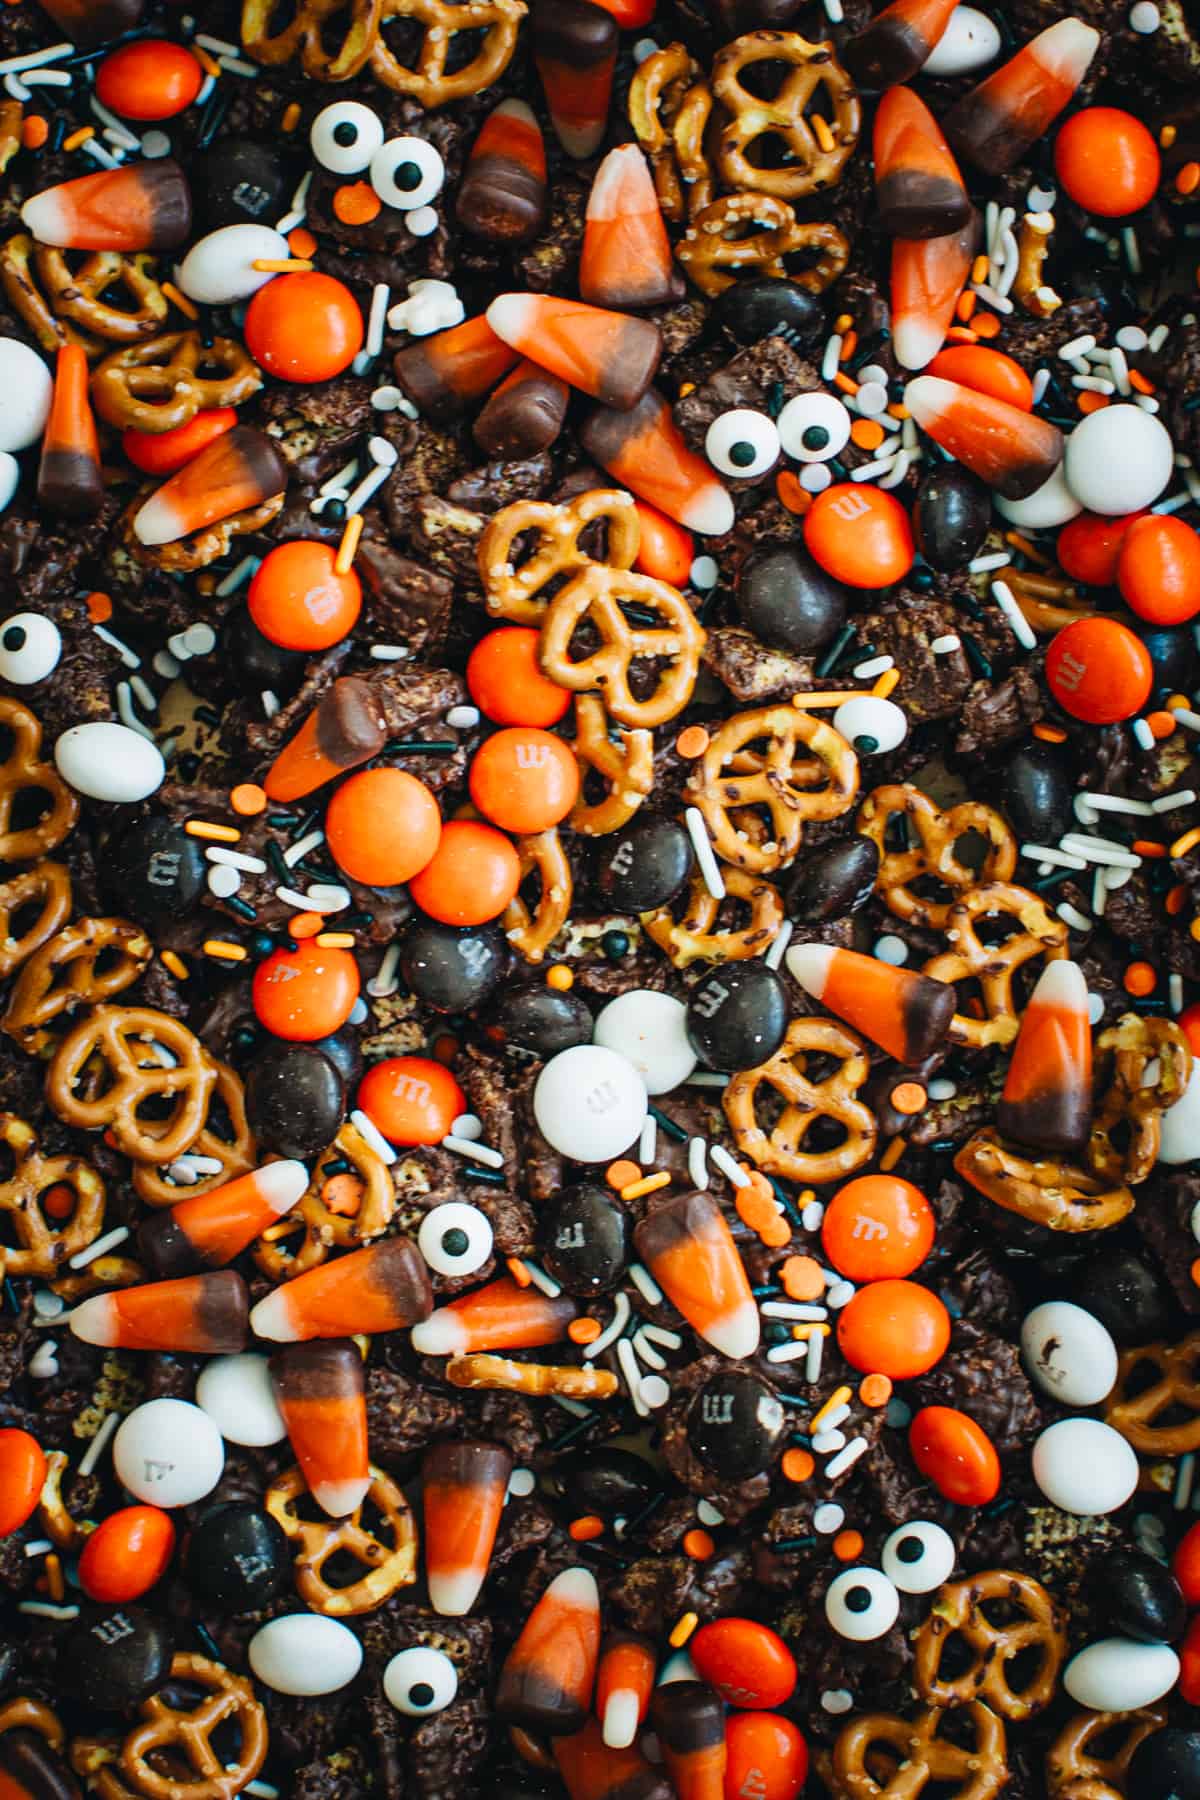 Snack mix for Halloween.